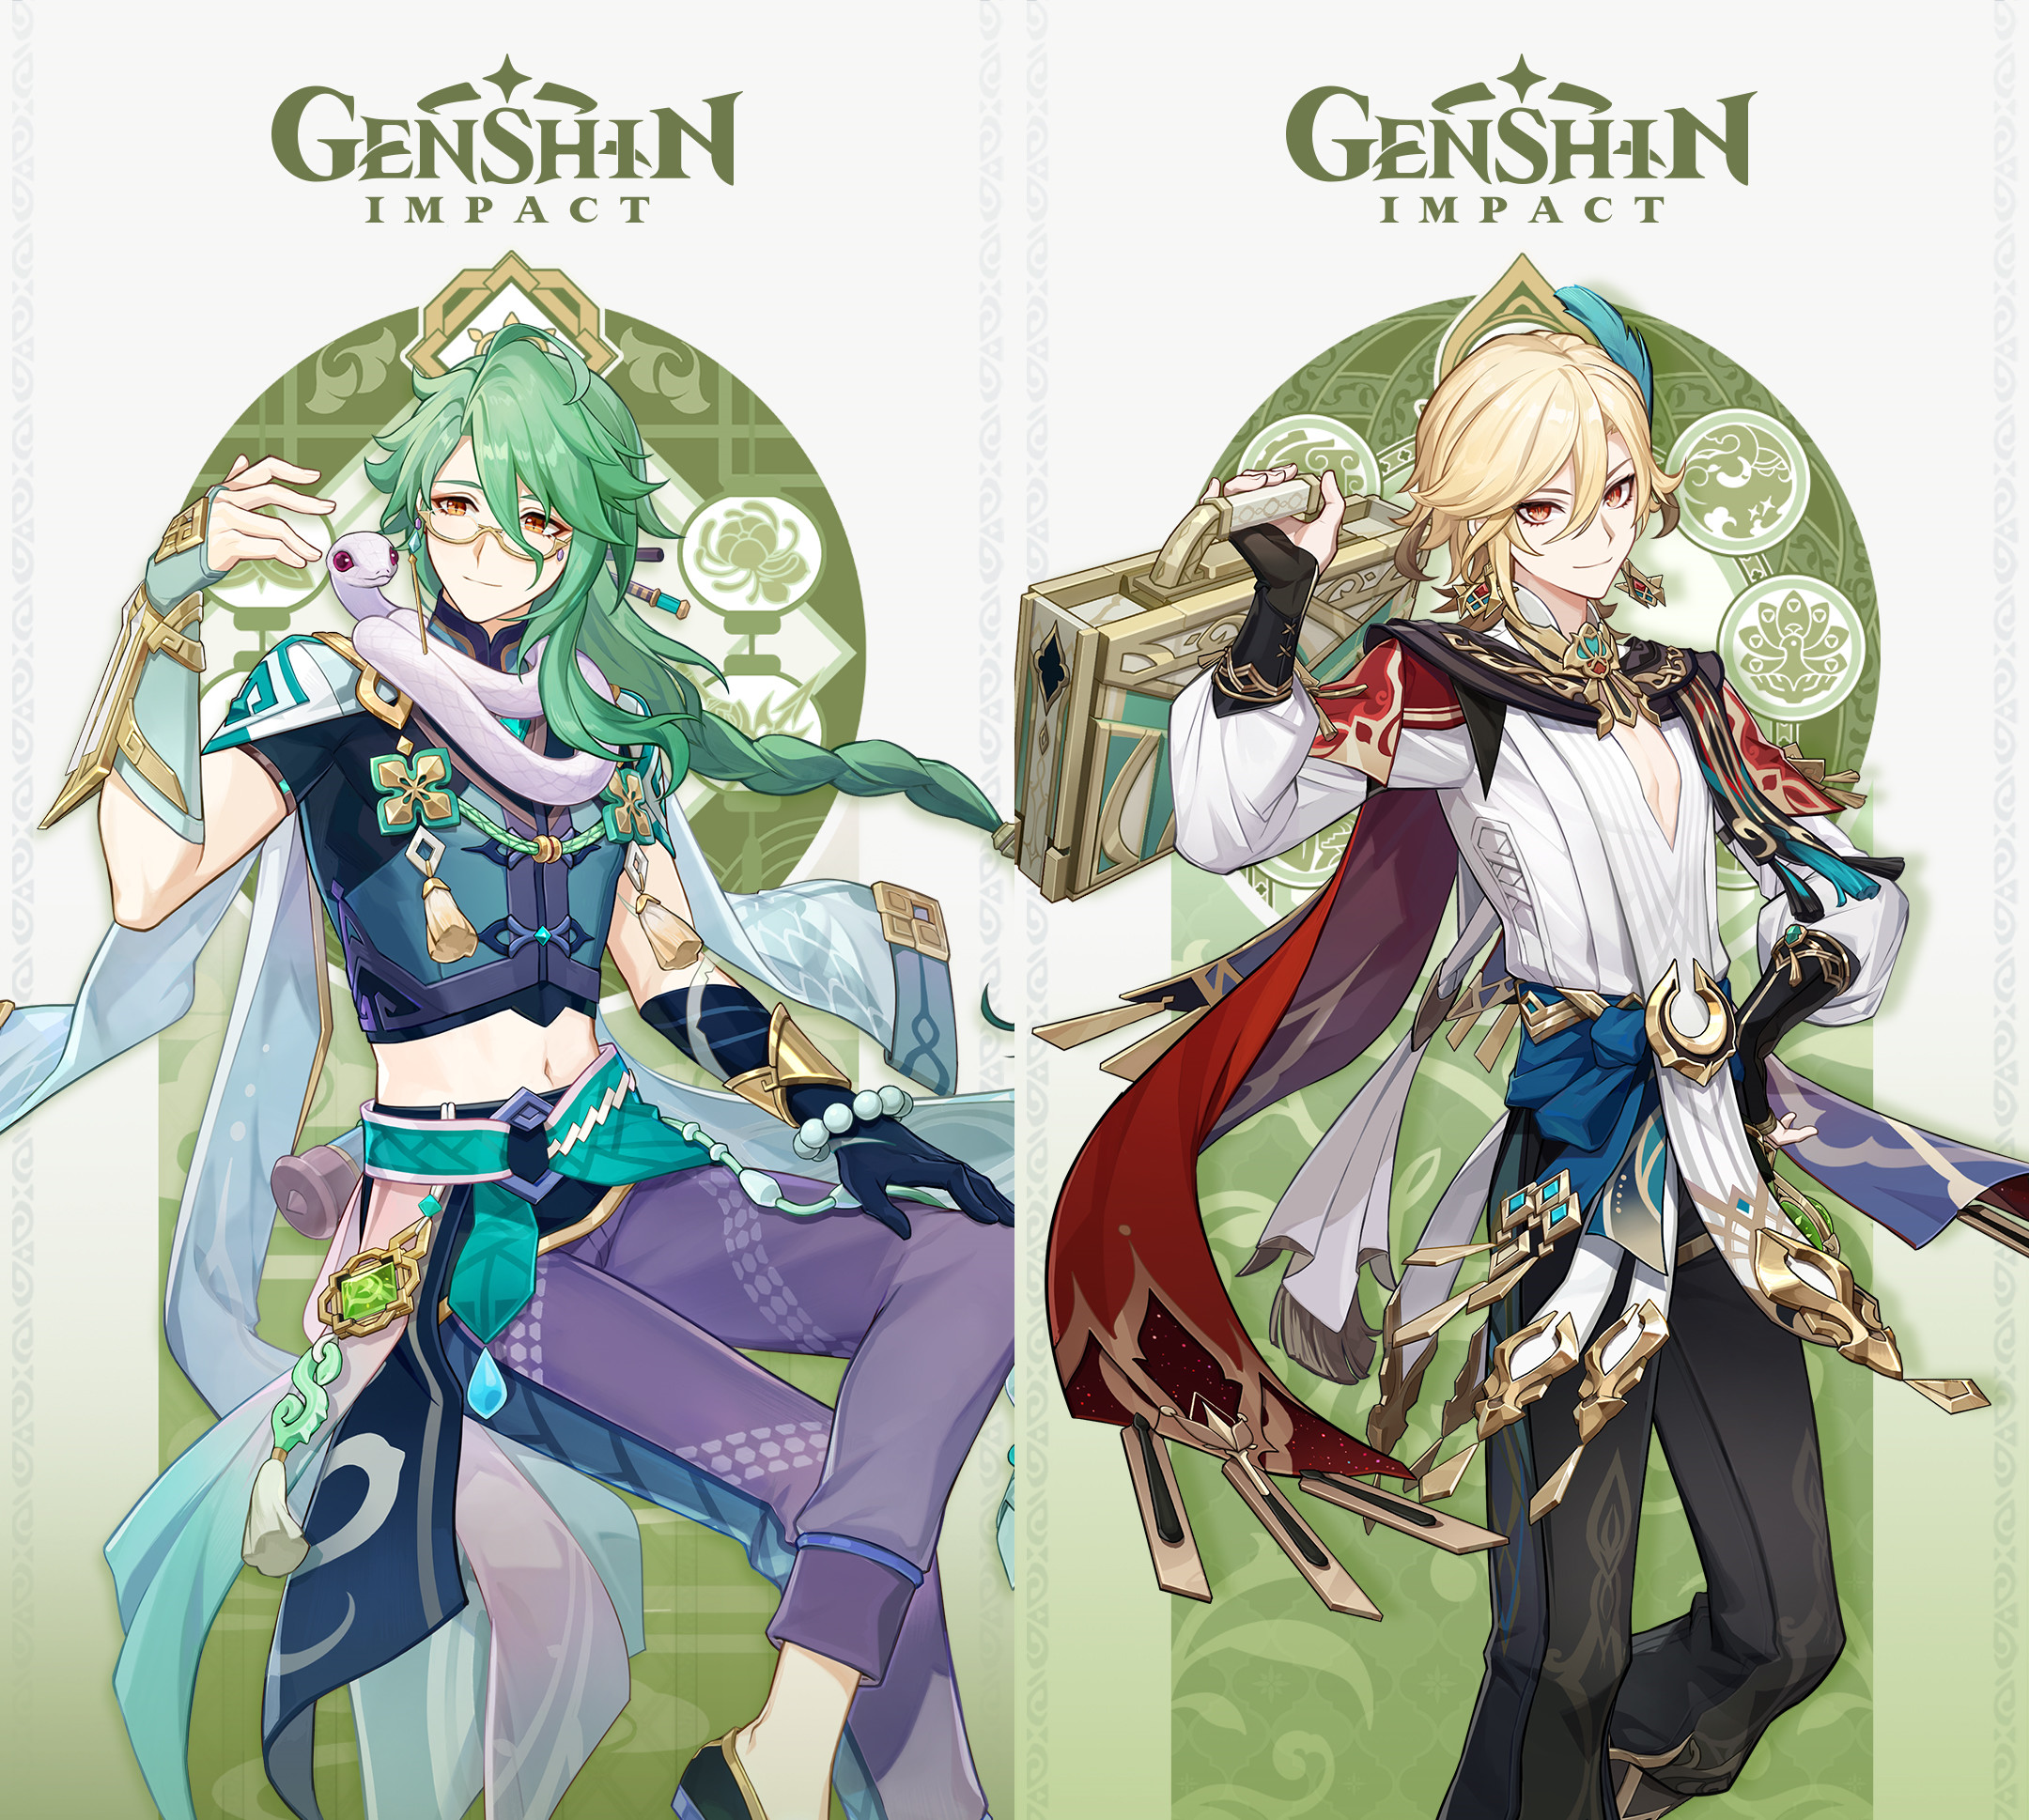 The 'Genshin Impact' v3.2 Gift Codes For Free Primogems, And New Character  Banners